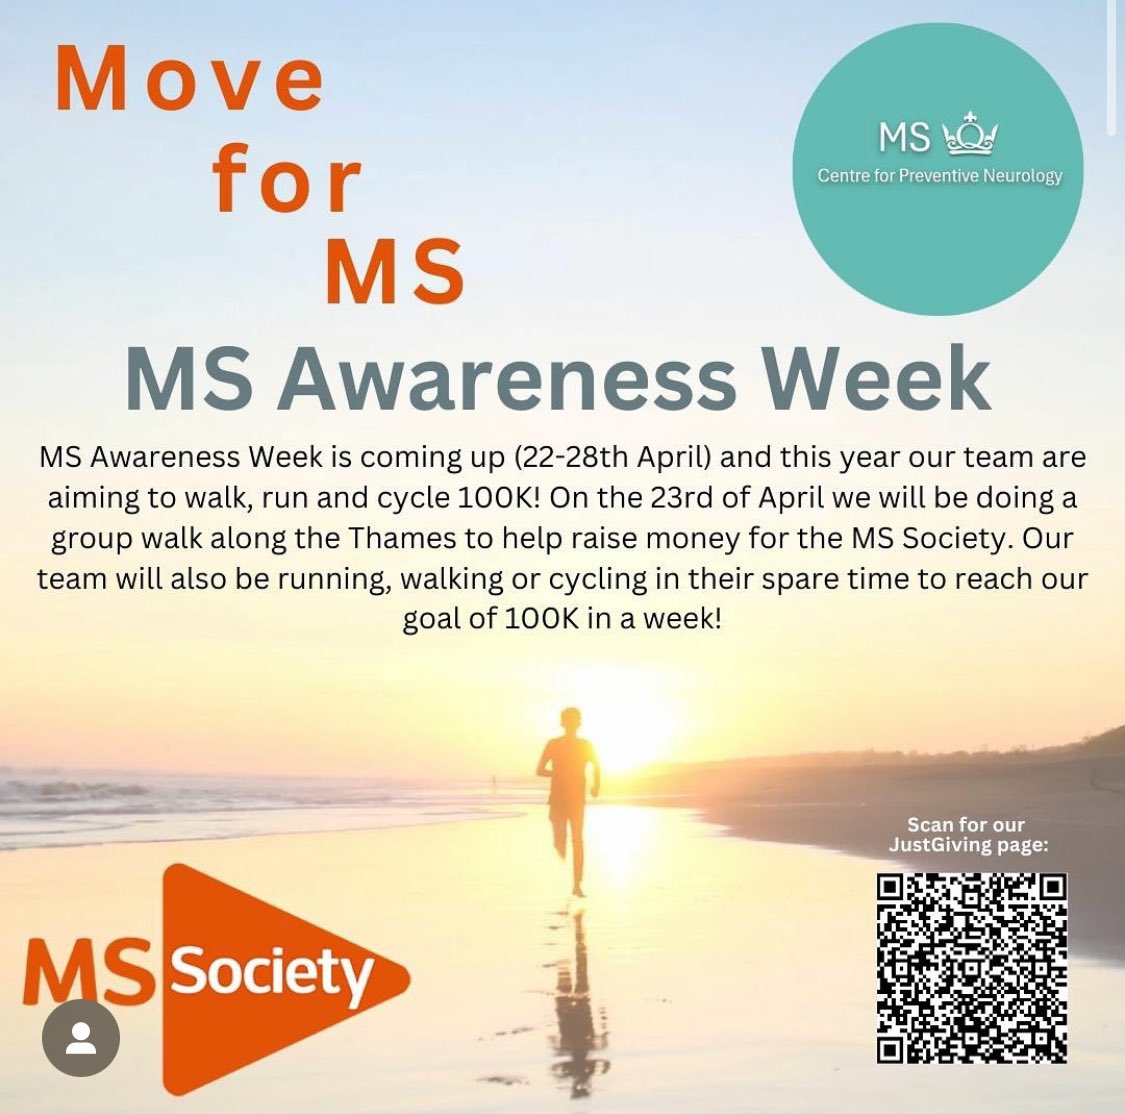 I’m going to try to cover 100km during MS awareness week with @preventiveneur1 running, walking and cycling. We’re fundraising for @mssocietyuk who fund some of our work, and more importantly support so many people with MS. justgiving.com/page/cpn-ms-gr…